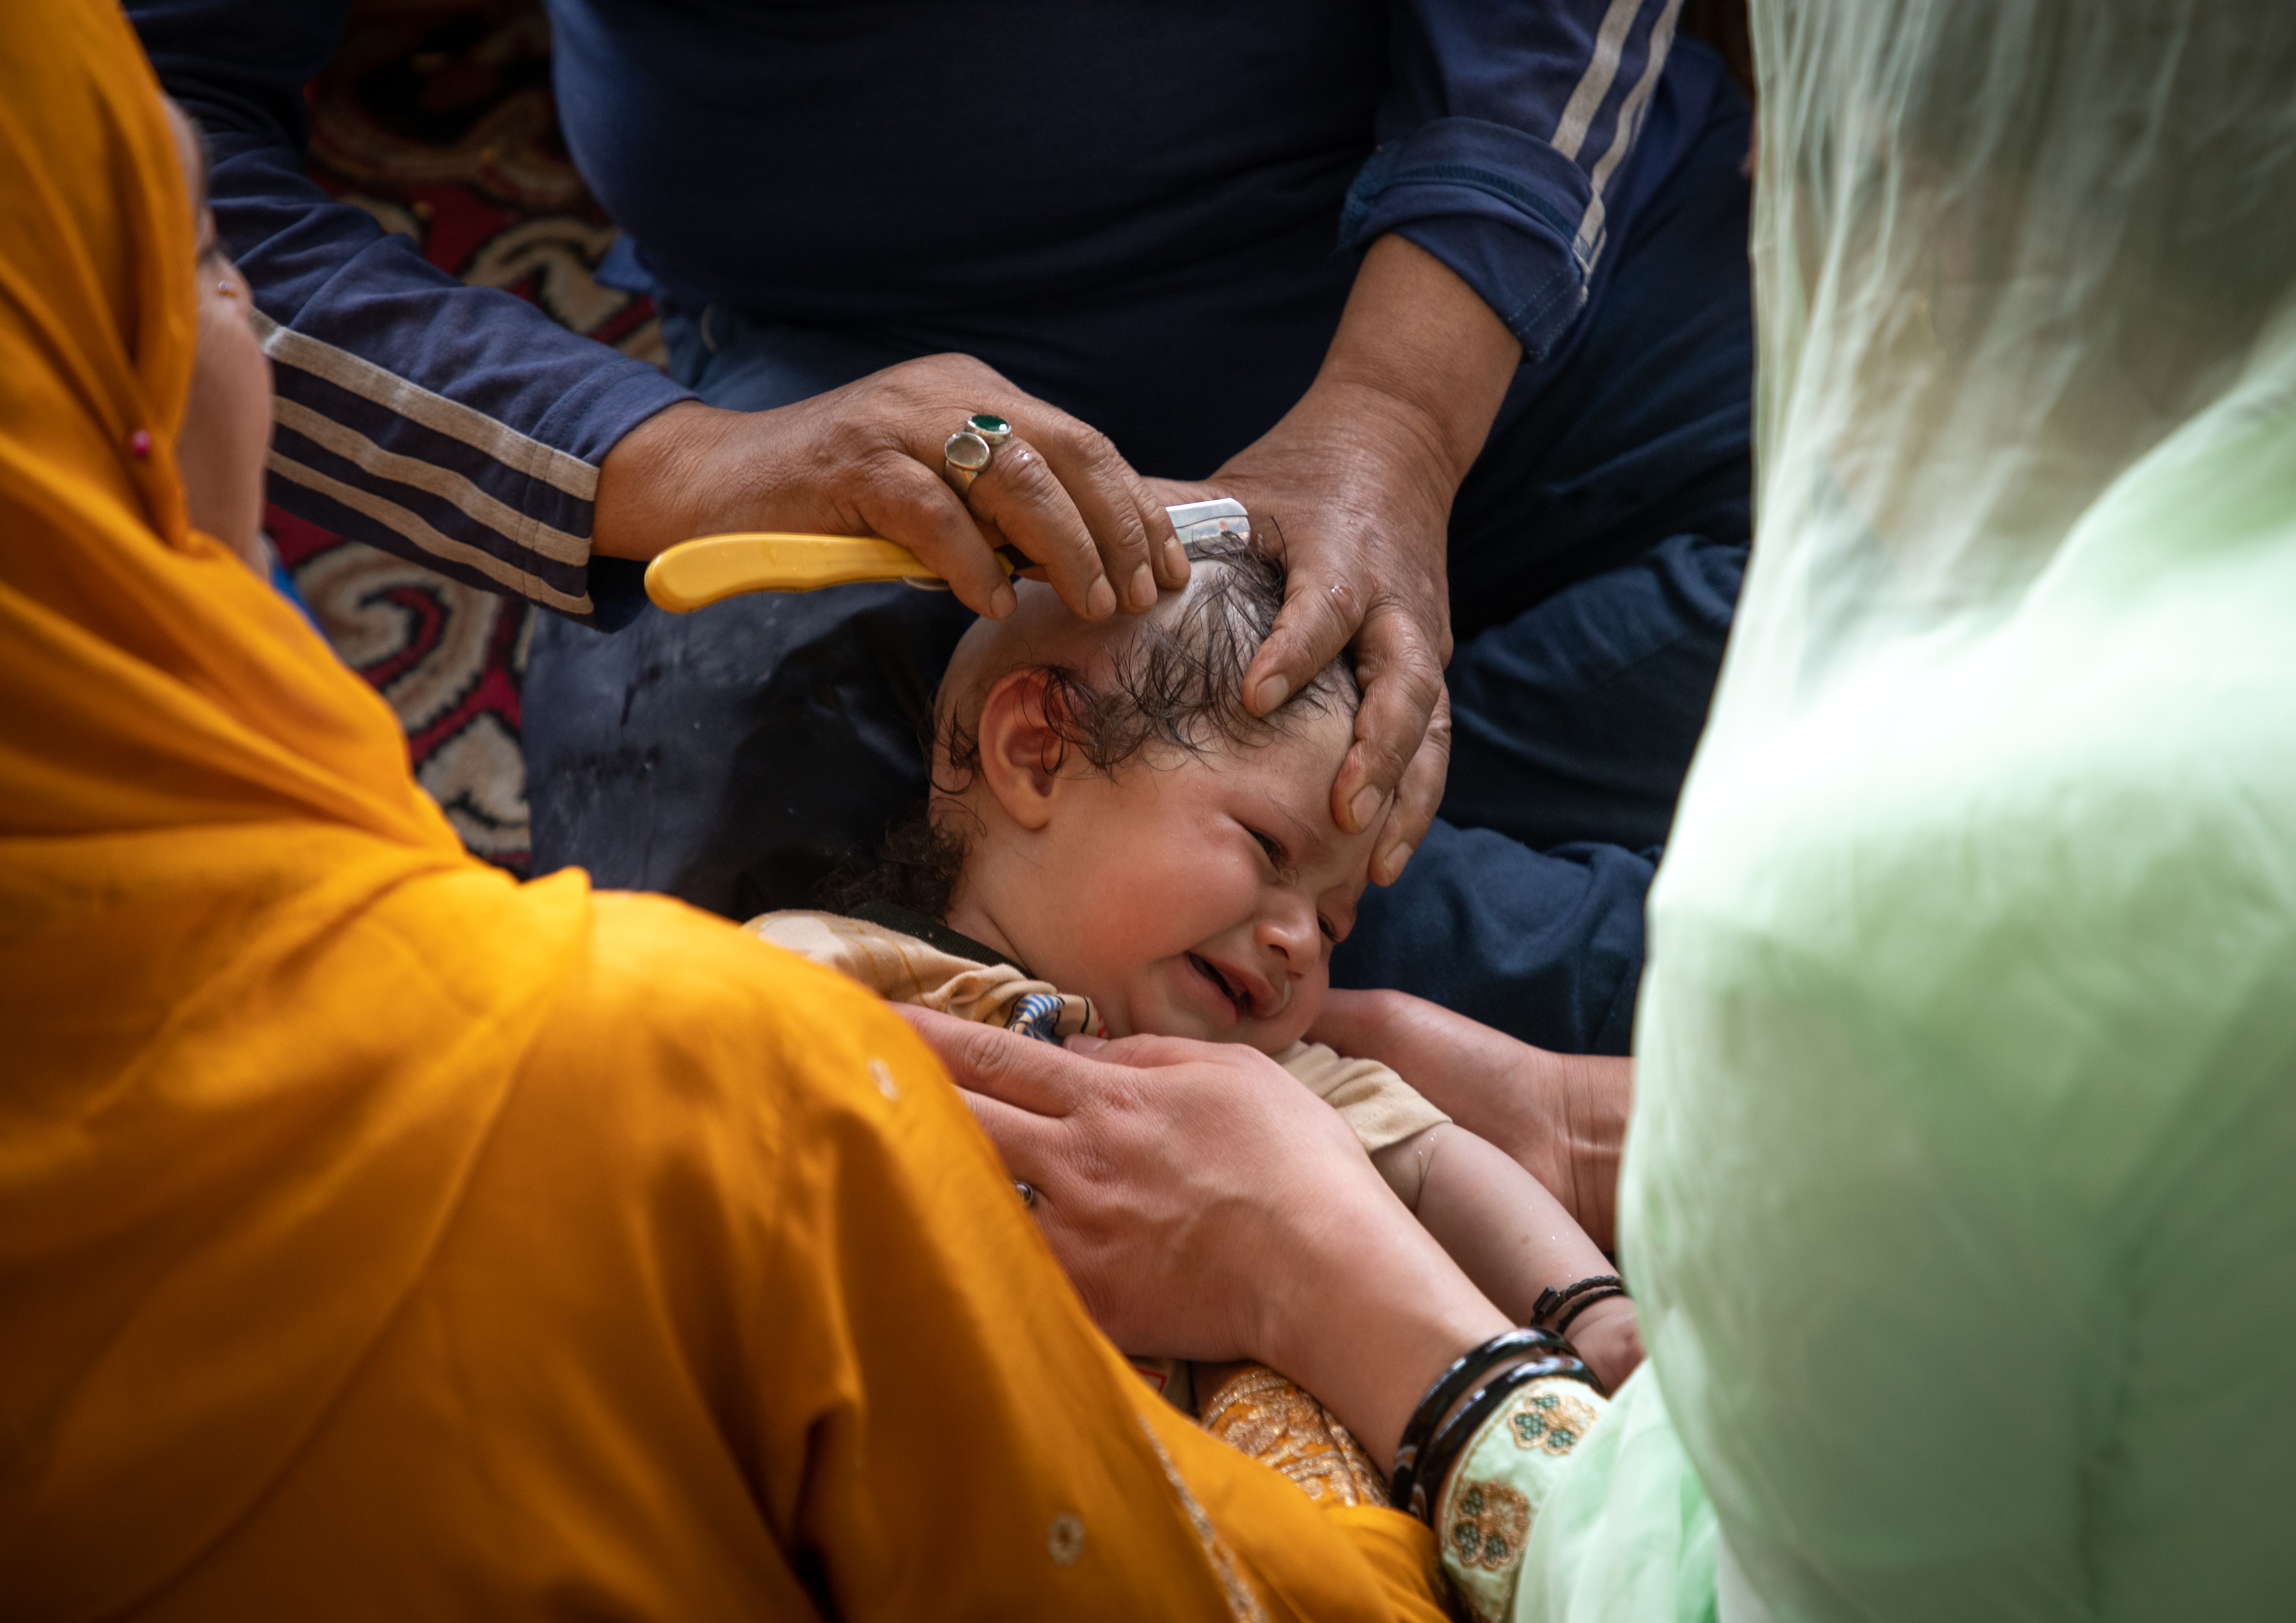 An infant's head is shaved during a Sufi ritual